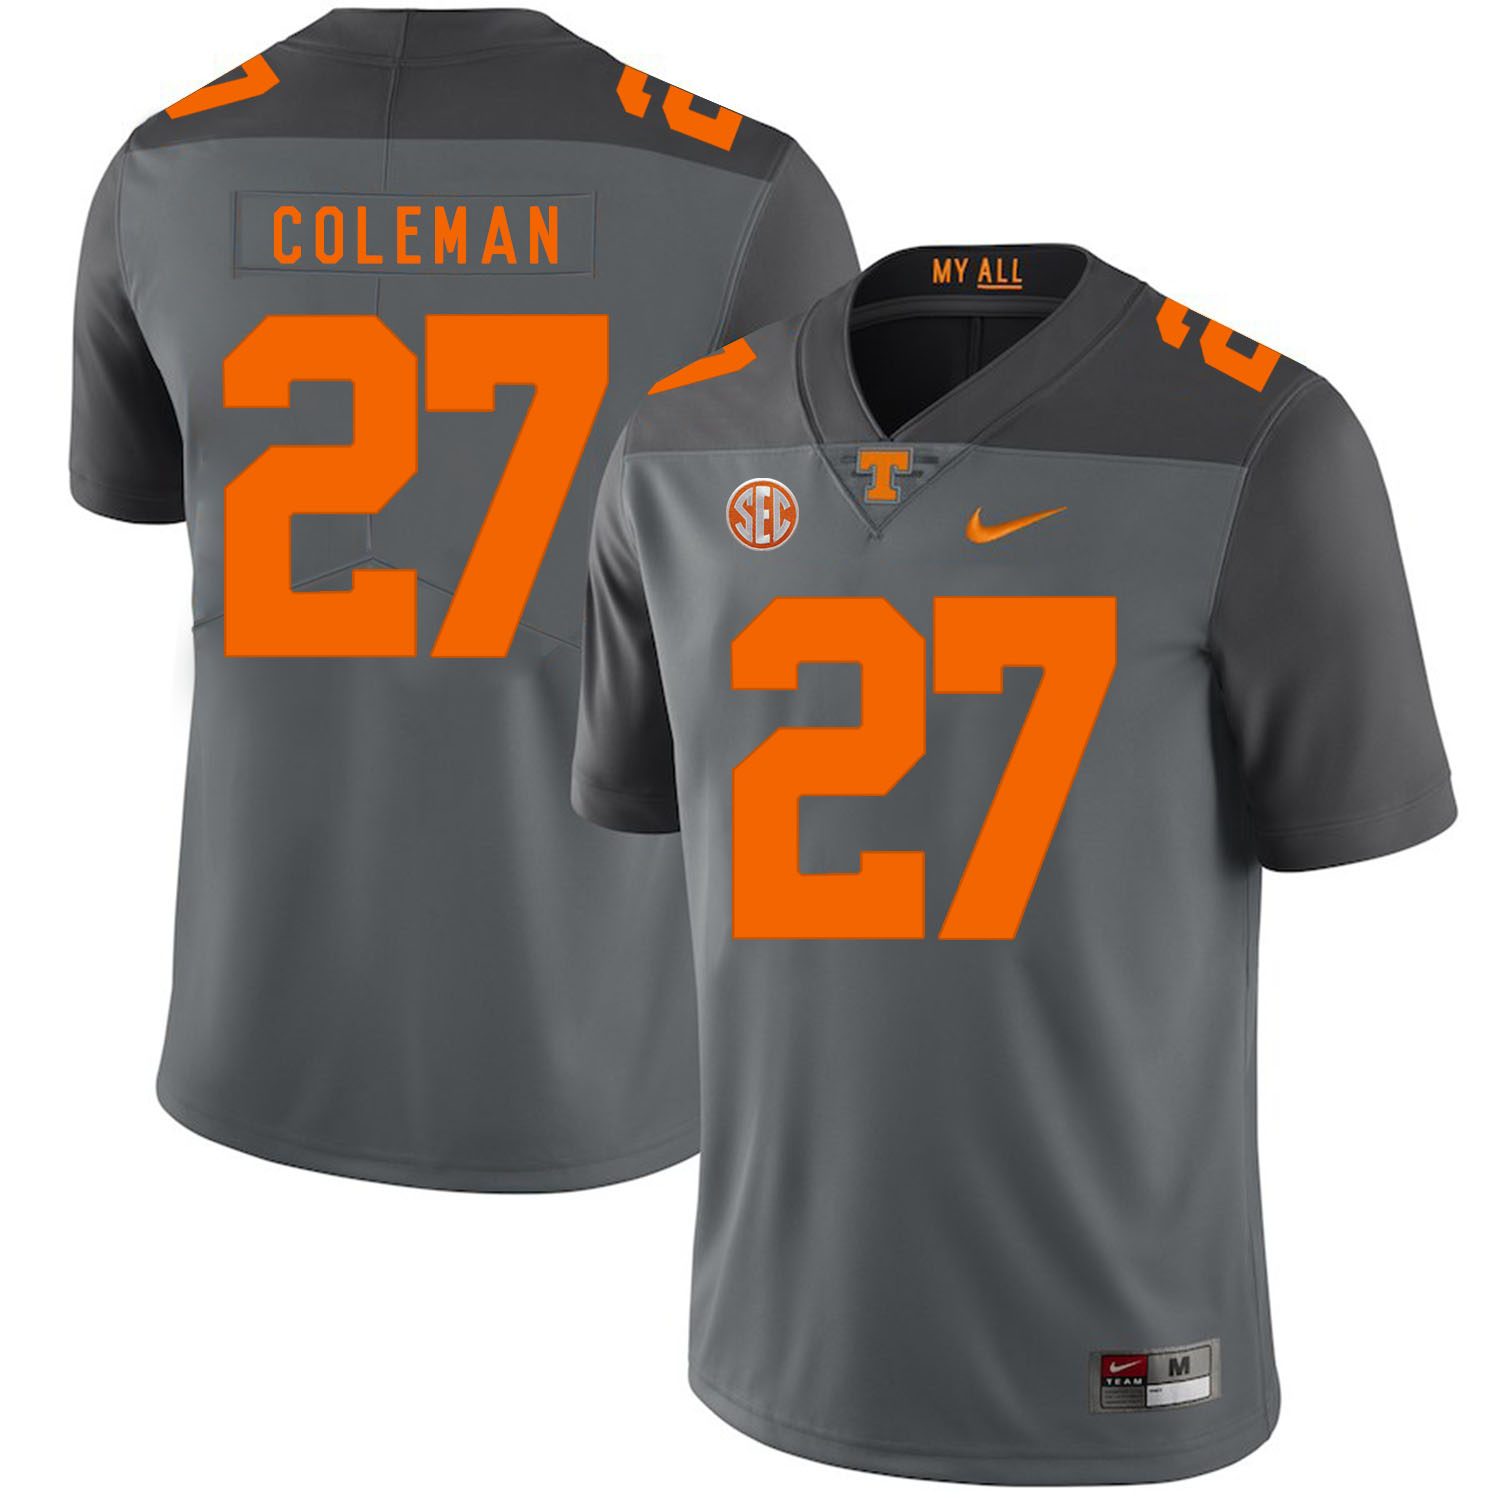 Tennessee Volunteers 27 Justin Coleman Gray Nike College Football Jersey